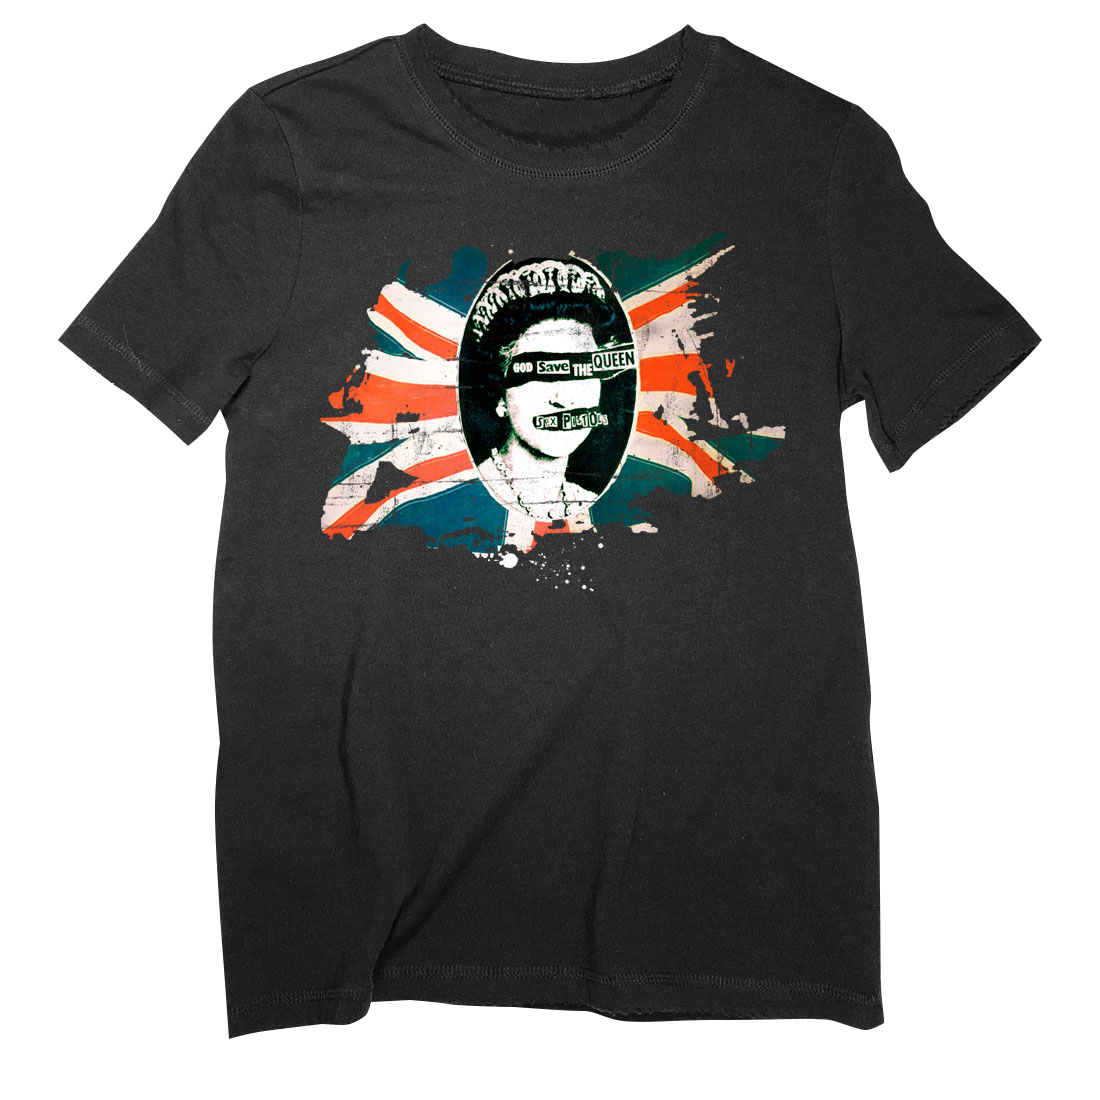 God Save The Queen - Black T-Shirt